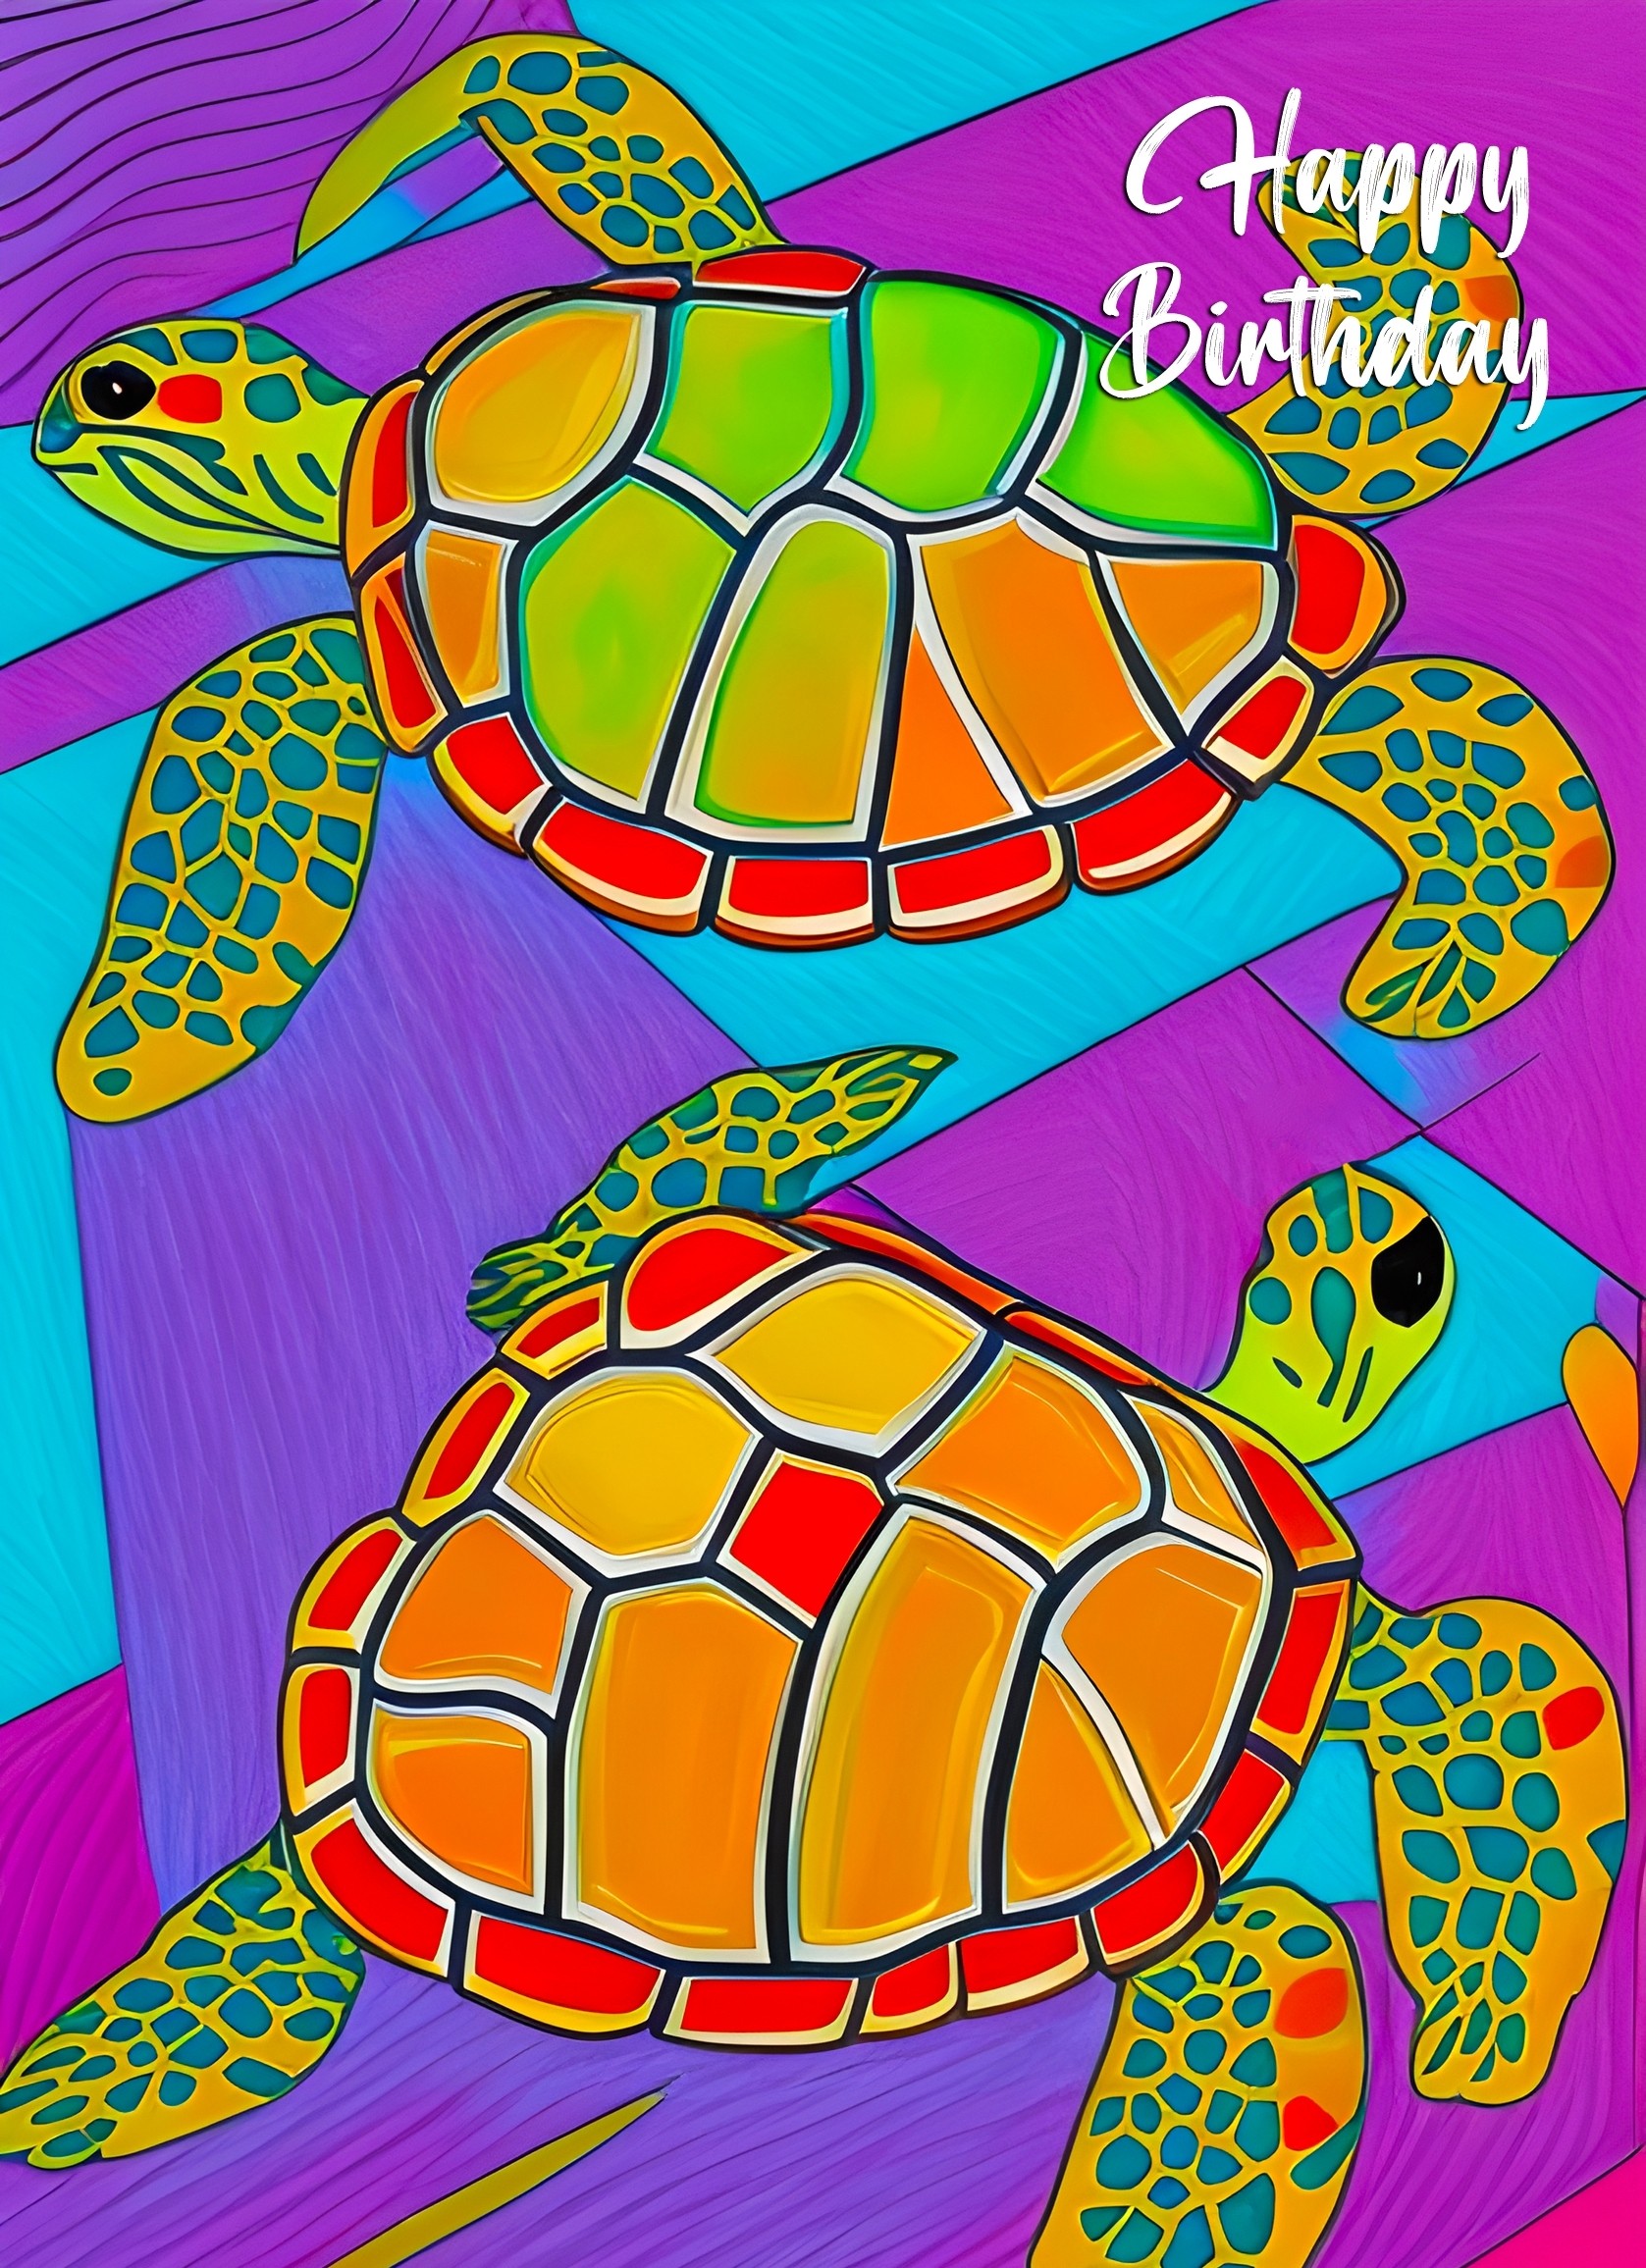 Turtle Animal Colourful Abstract Art Birthday Card